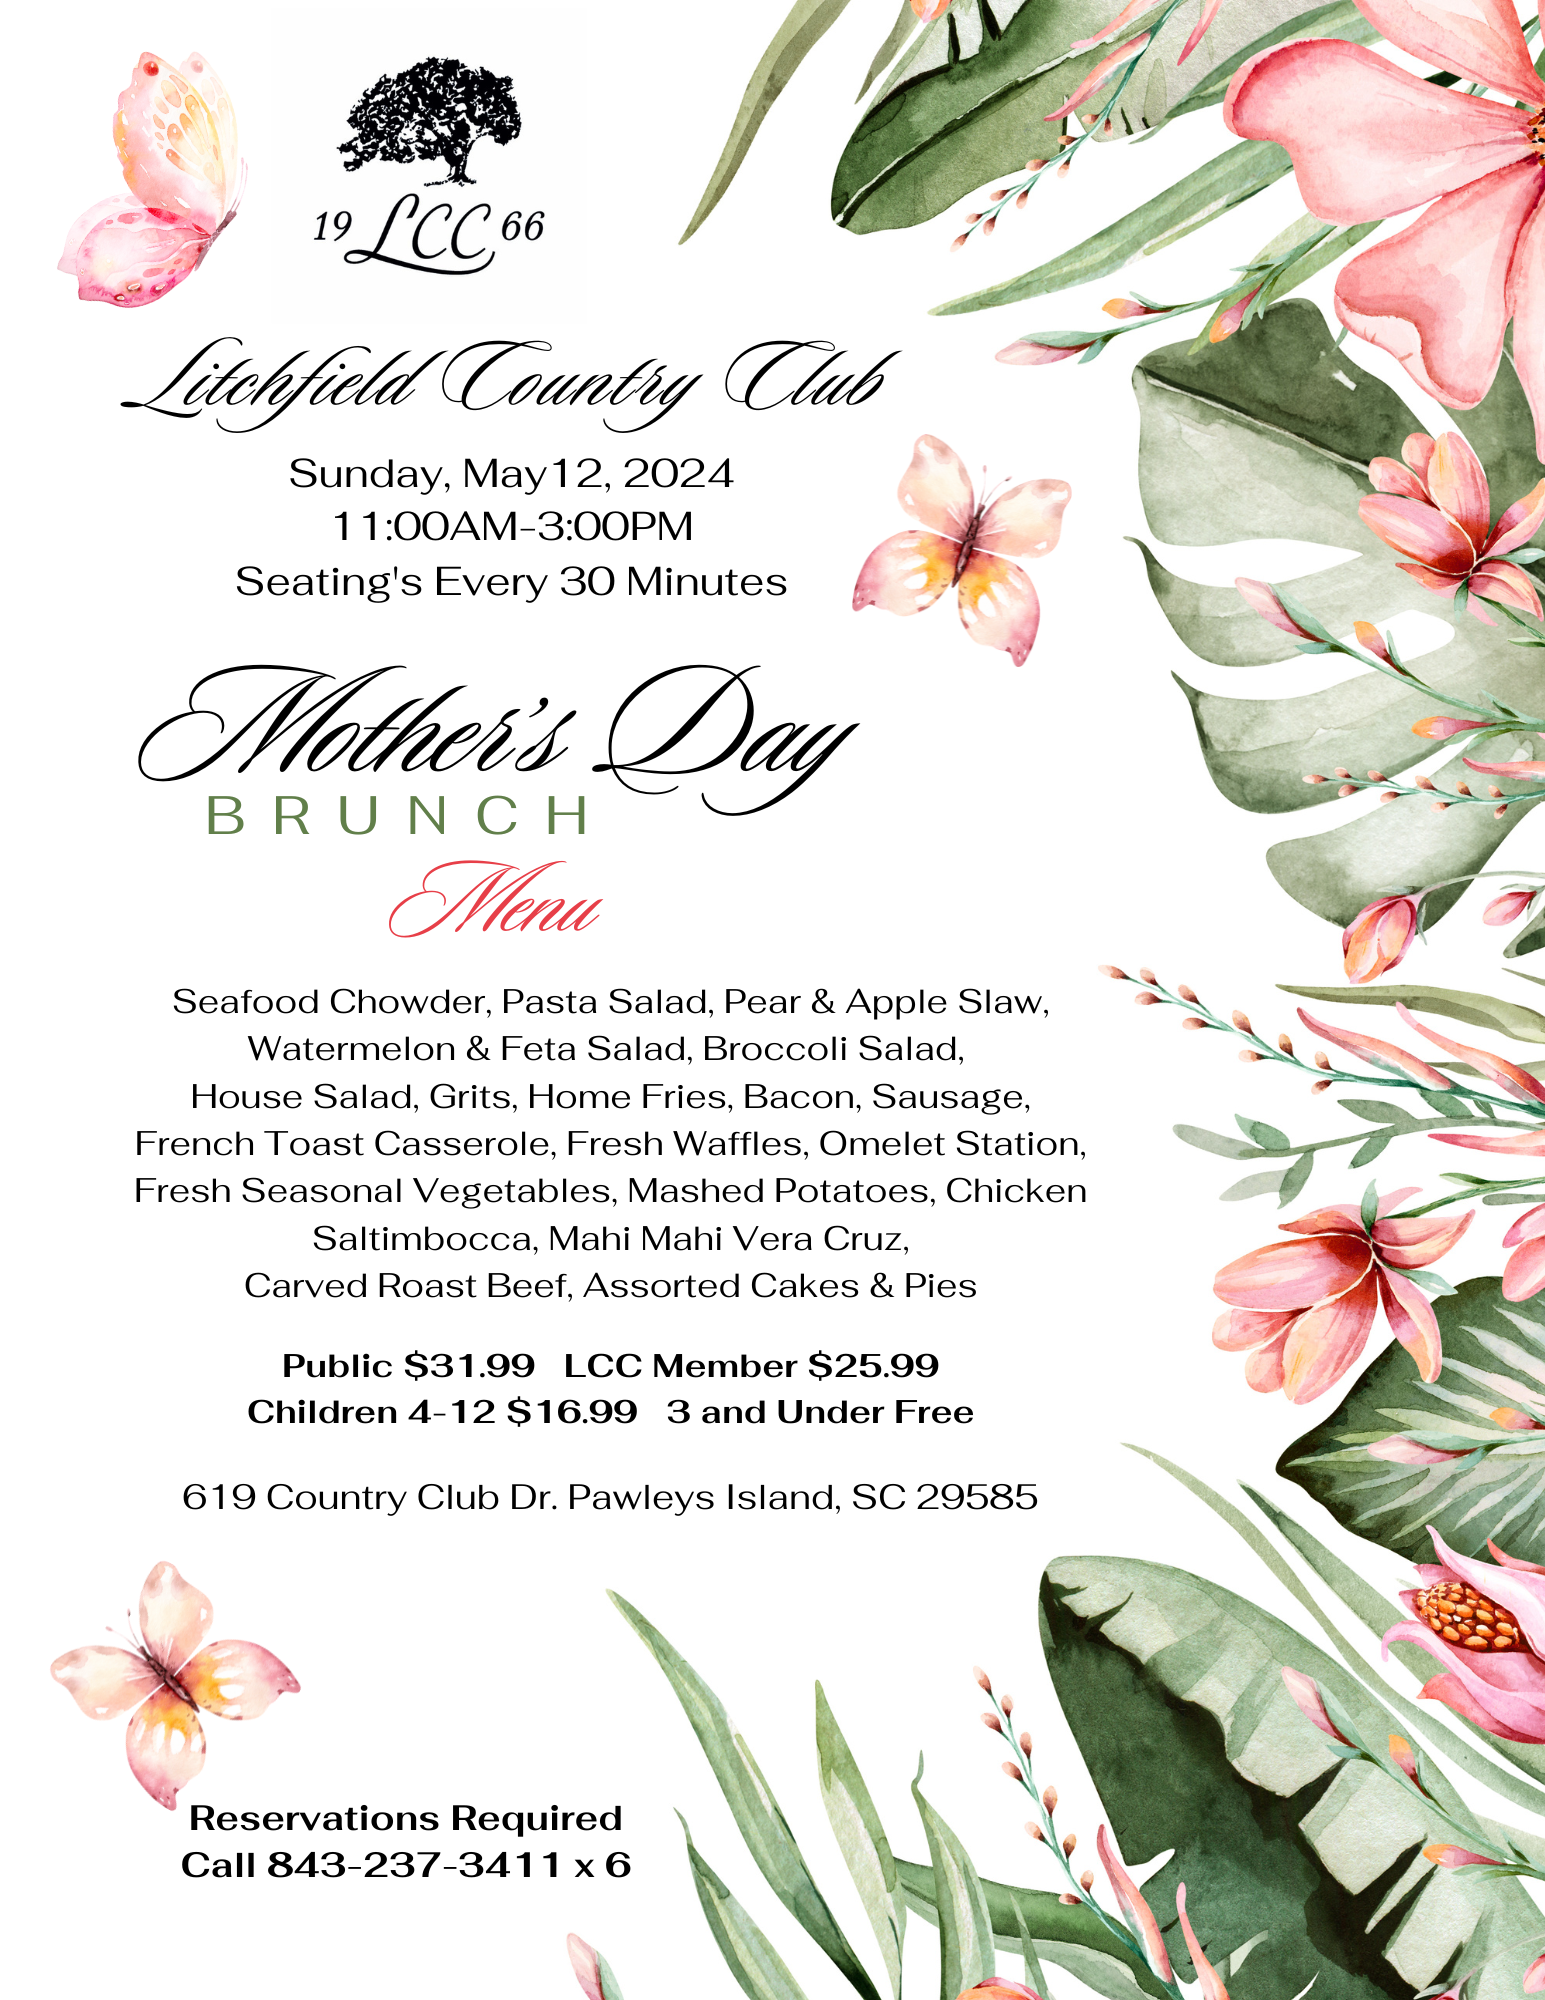 Image: Litchfield Country Club Mother's Day Brunch